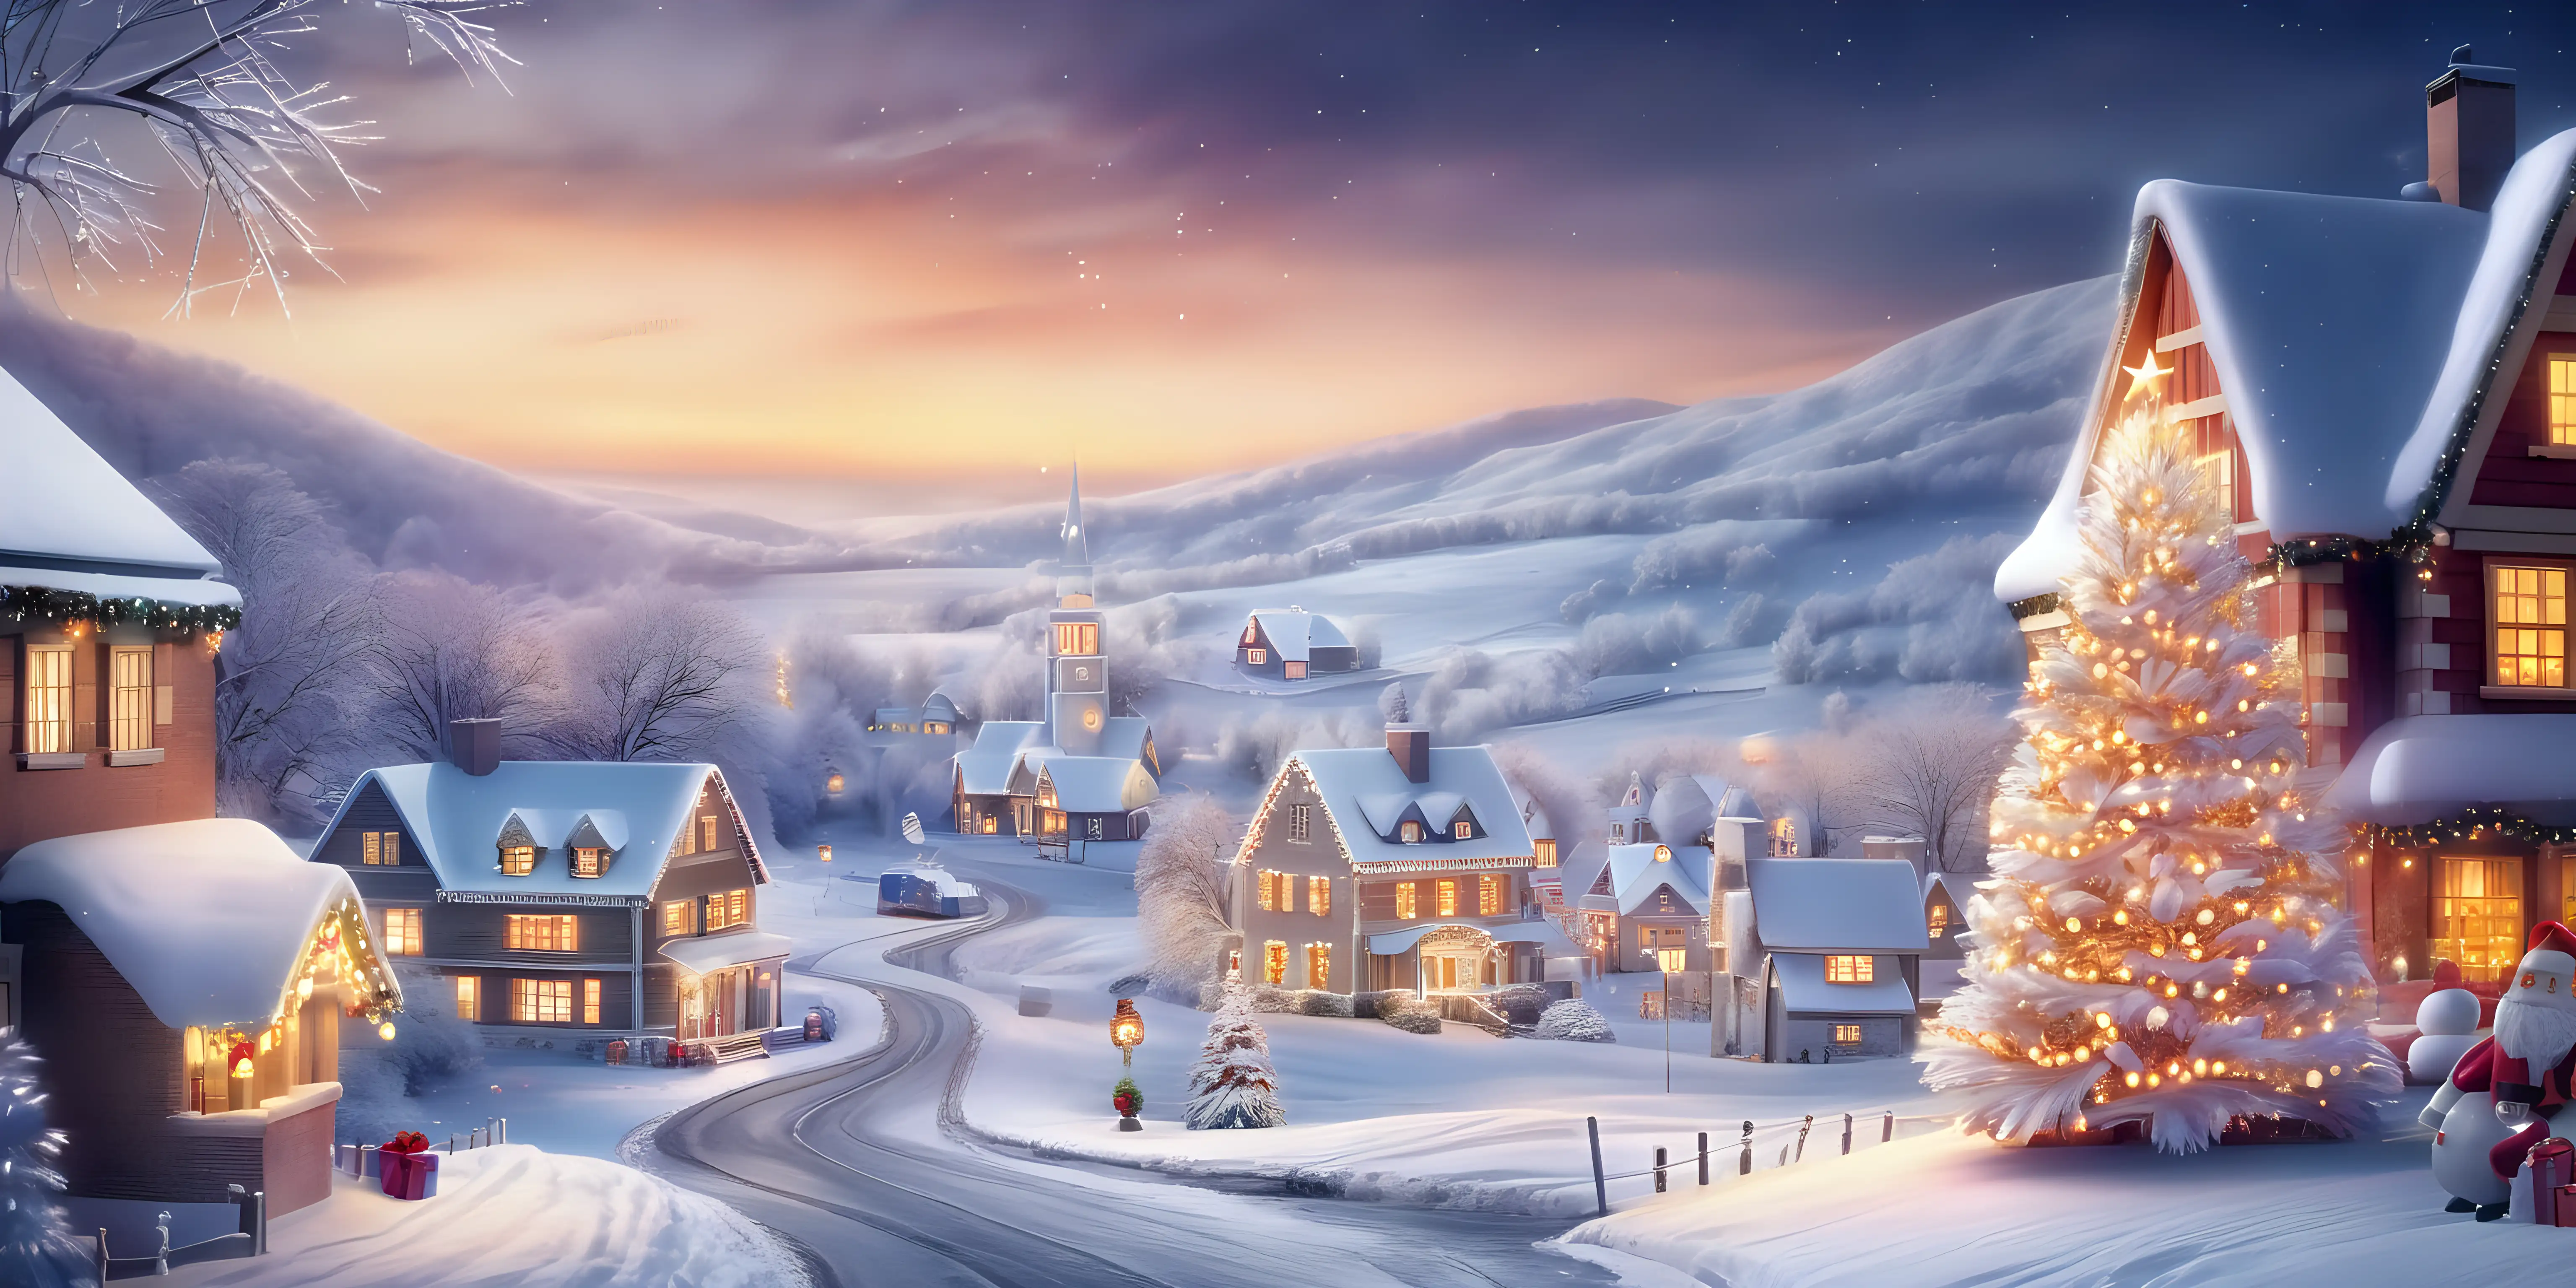 Gorgeous Christmas Scenery Festive Lights and Snowy Landscape